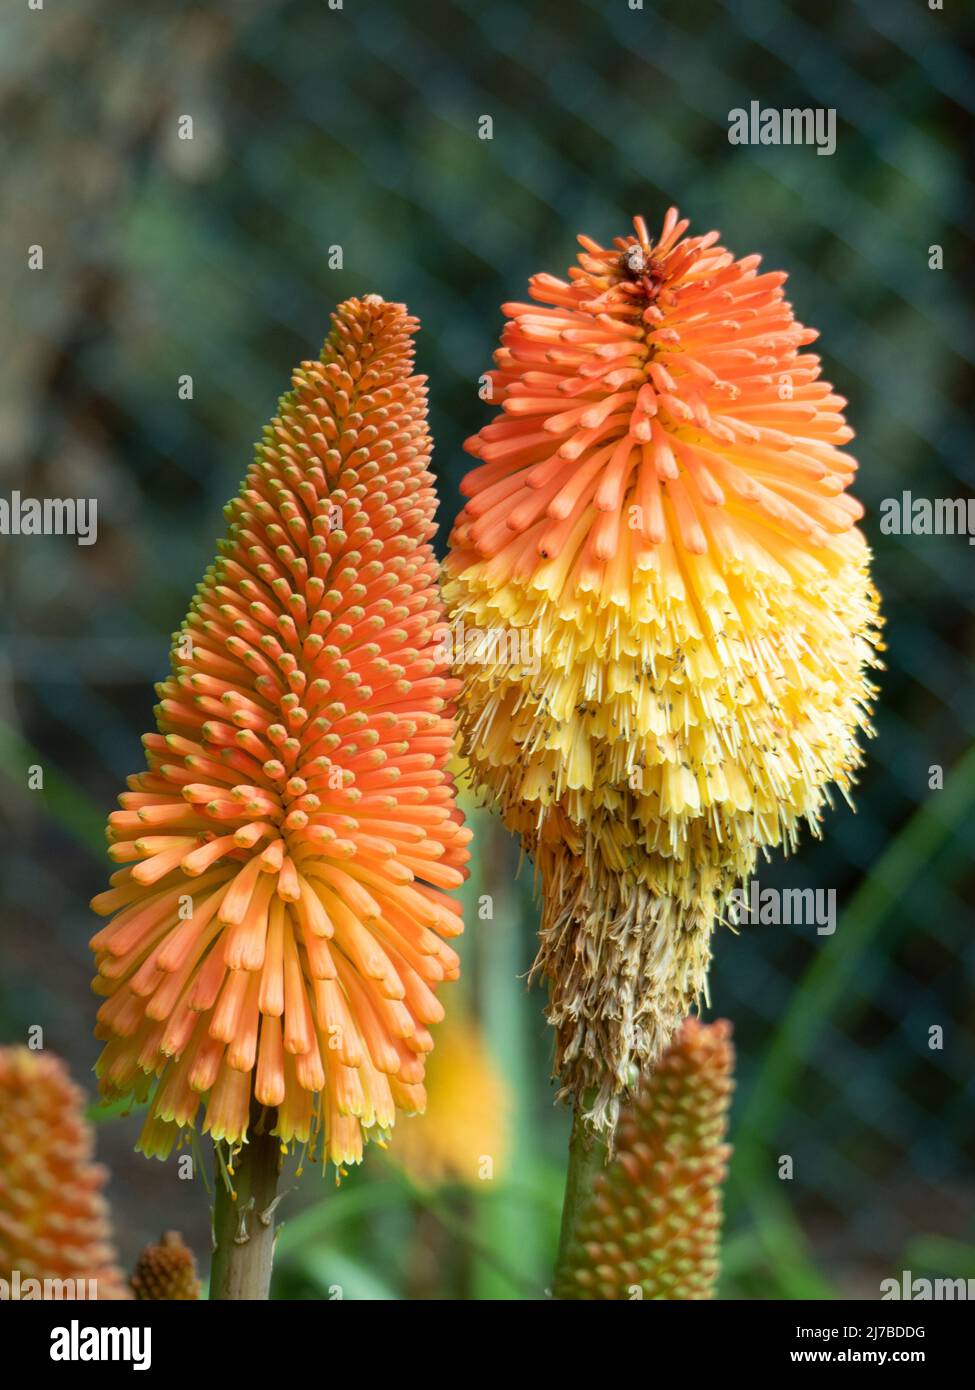 Flowers, Kniphofia, Red Hot Poker plant, two bright and vividly coloured orange and yellow Flower spires, Australian Coastal Garden, Torch Lily Stock Photo